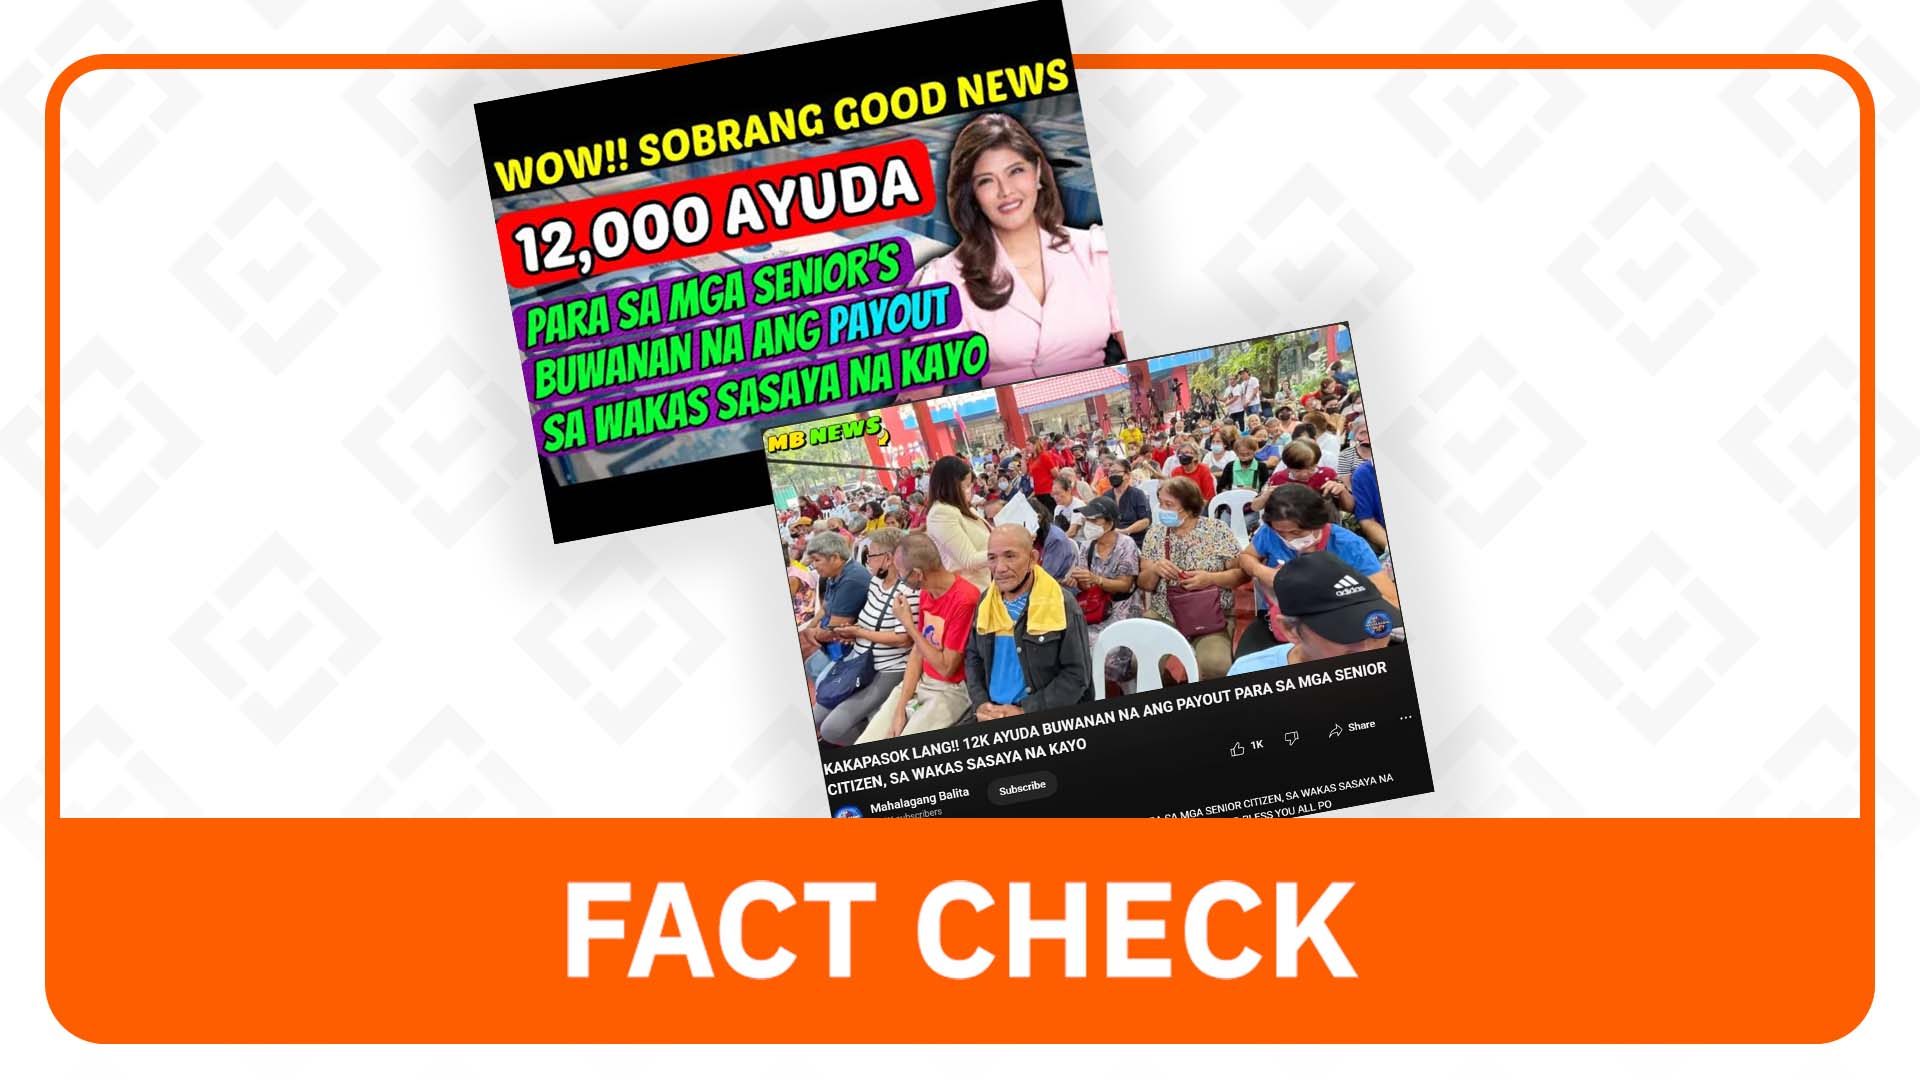 FACT CHECK: Indigent senior citizens entitled to P1,000 pension, not P12,000